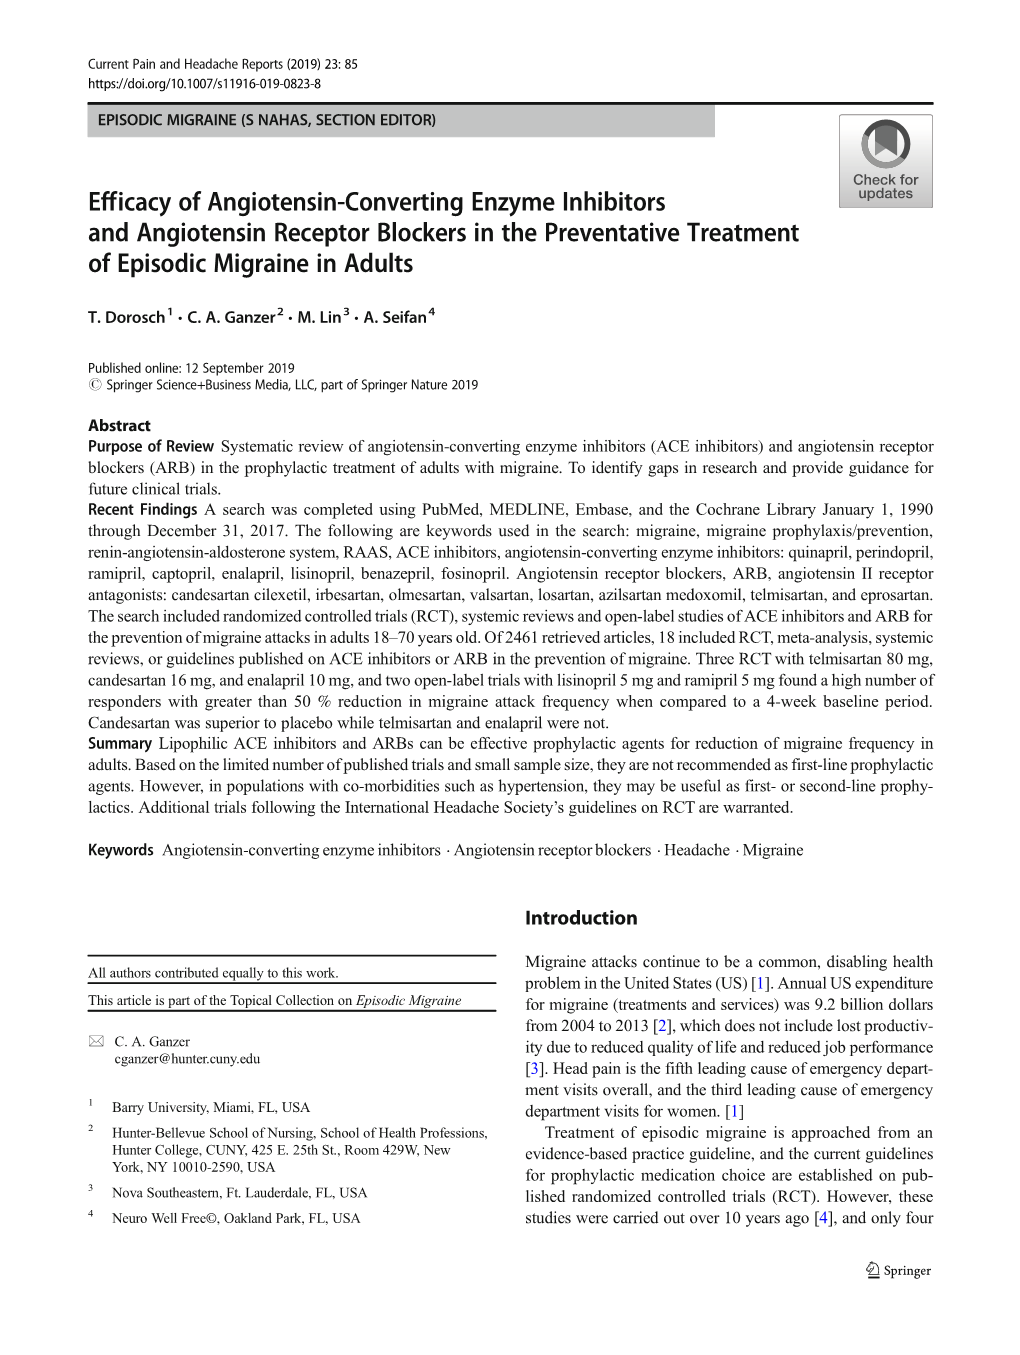 Efficacy of Angiotensin-Converting Enzyme Inhibitors and Angiotensin Receptor Blockers in the Preventative Treatment of Episodic Migraine in Adults